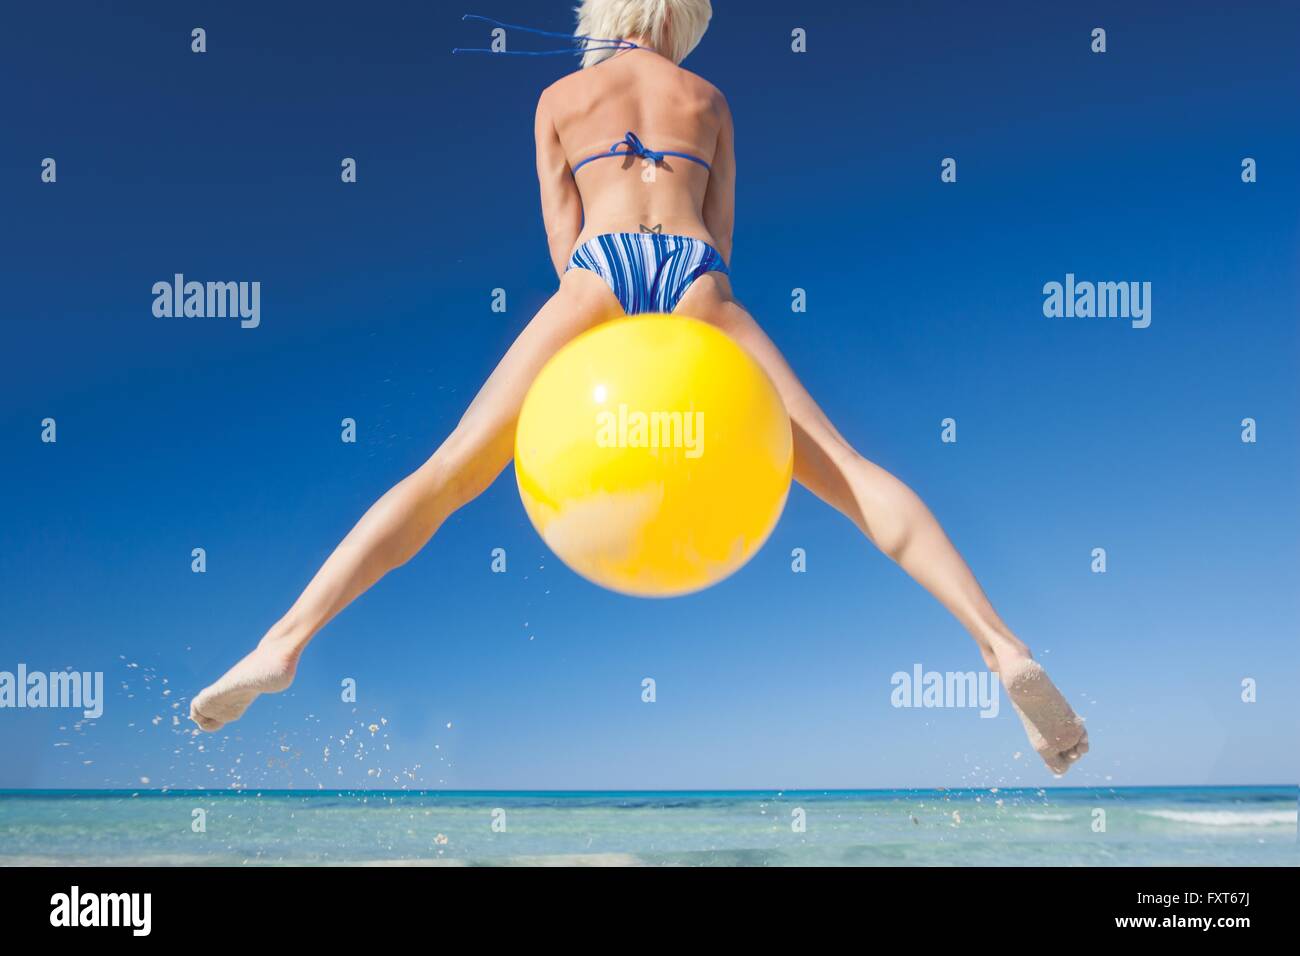 Rear view of young woman jumping mid air on space hopper at beach, Majorca, Spain Stock Photo